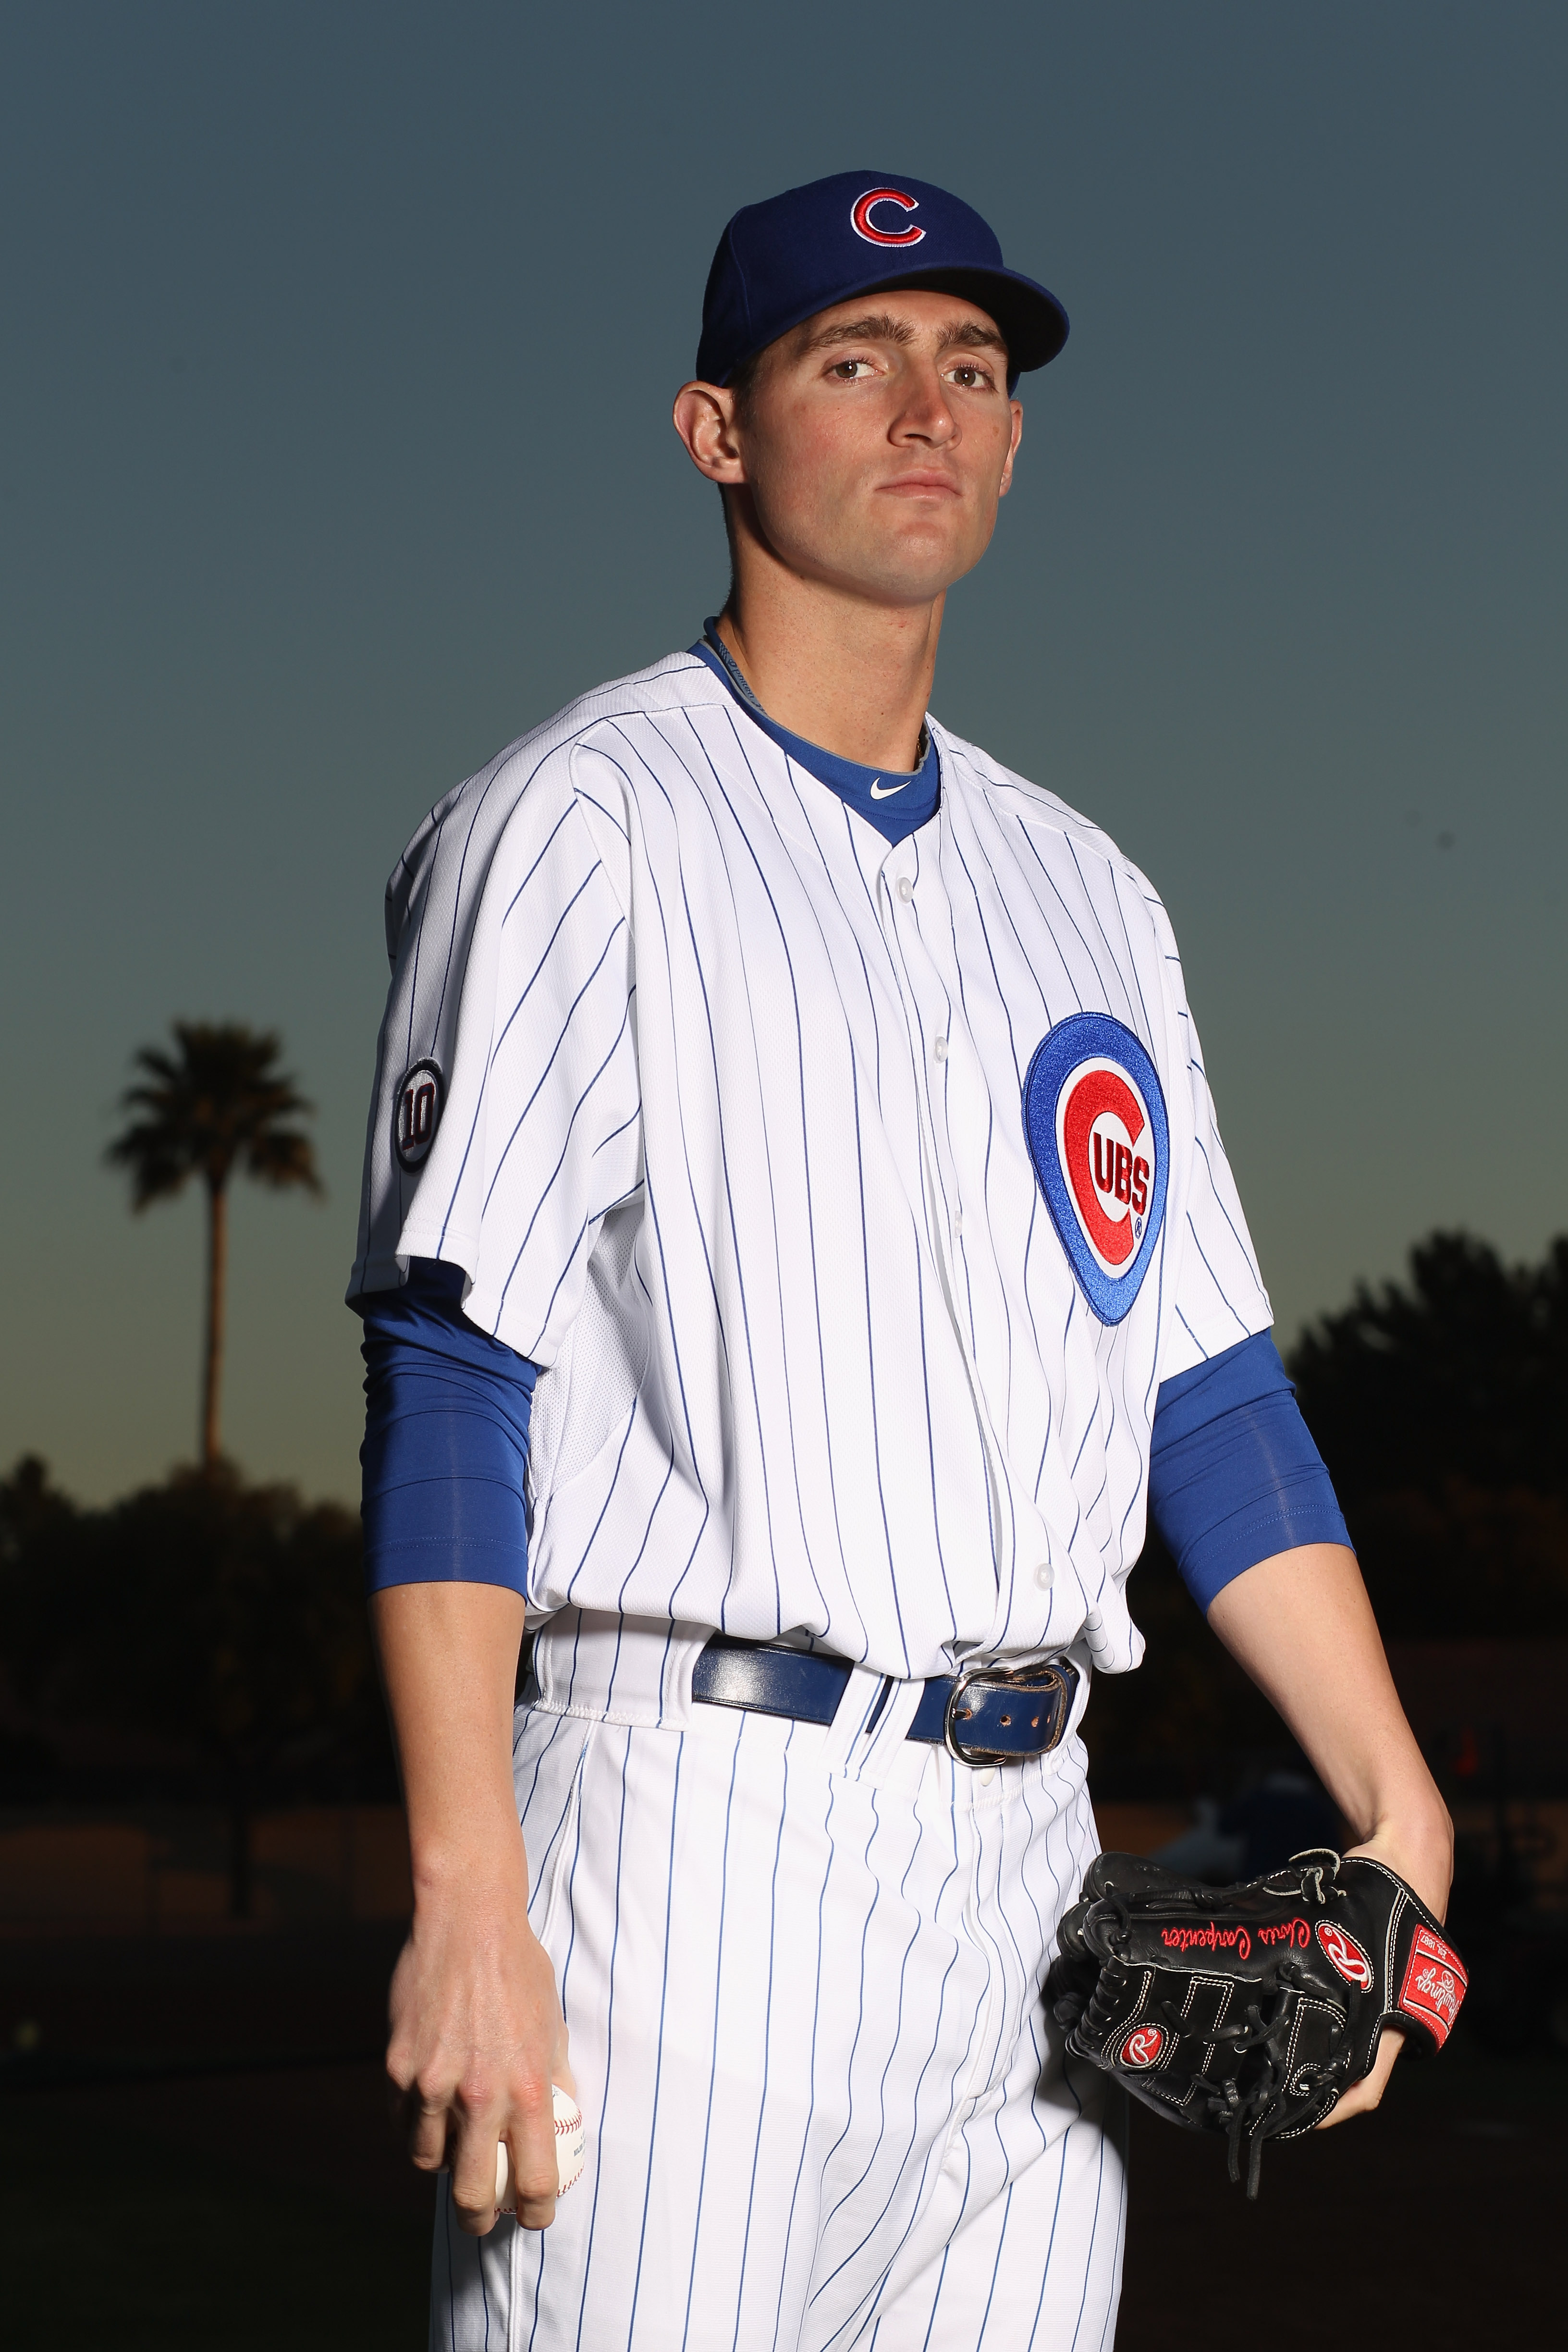 MESA, AZ - FEBRUARY 22:  Chris Carpenter #60 of the Chicago Cubs poses for a portrait during media photo day at Finch Park on February 22, 2011 in Mesa, Arizona.  (Photo by Ezra Shaw/Getty Images)